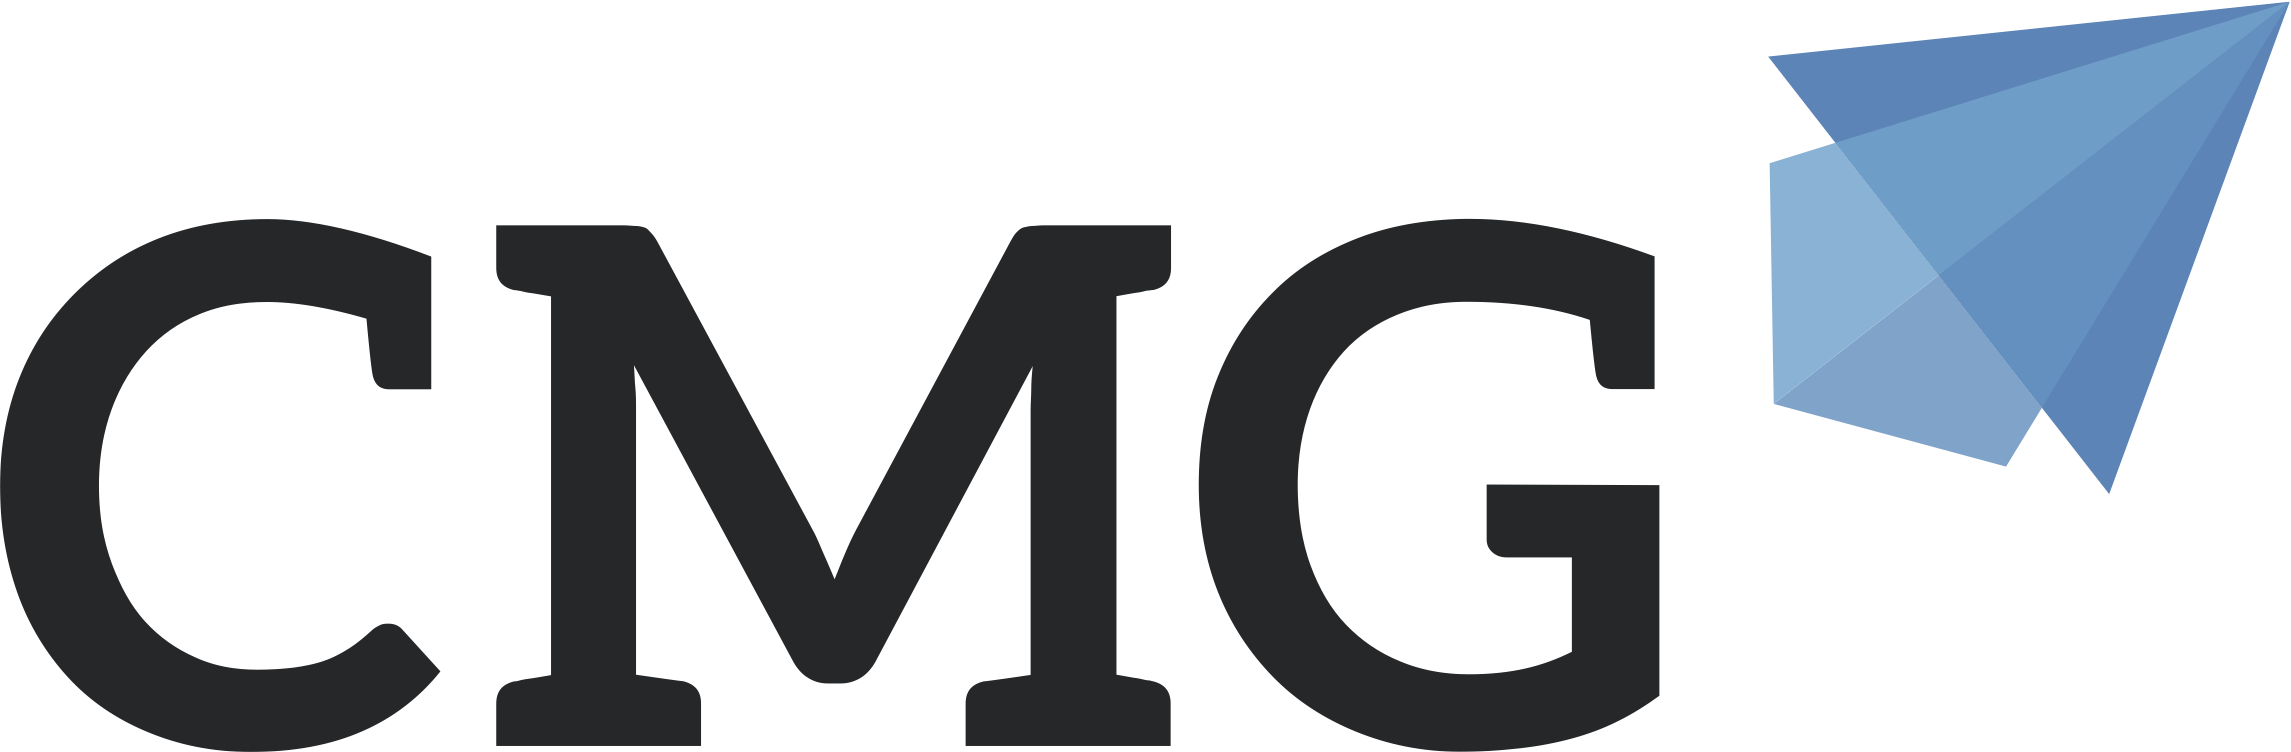 Capital Markets Leadership from Point72 and Durable Capital Join CMG Buy-Side Advisory Board